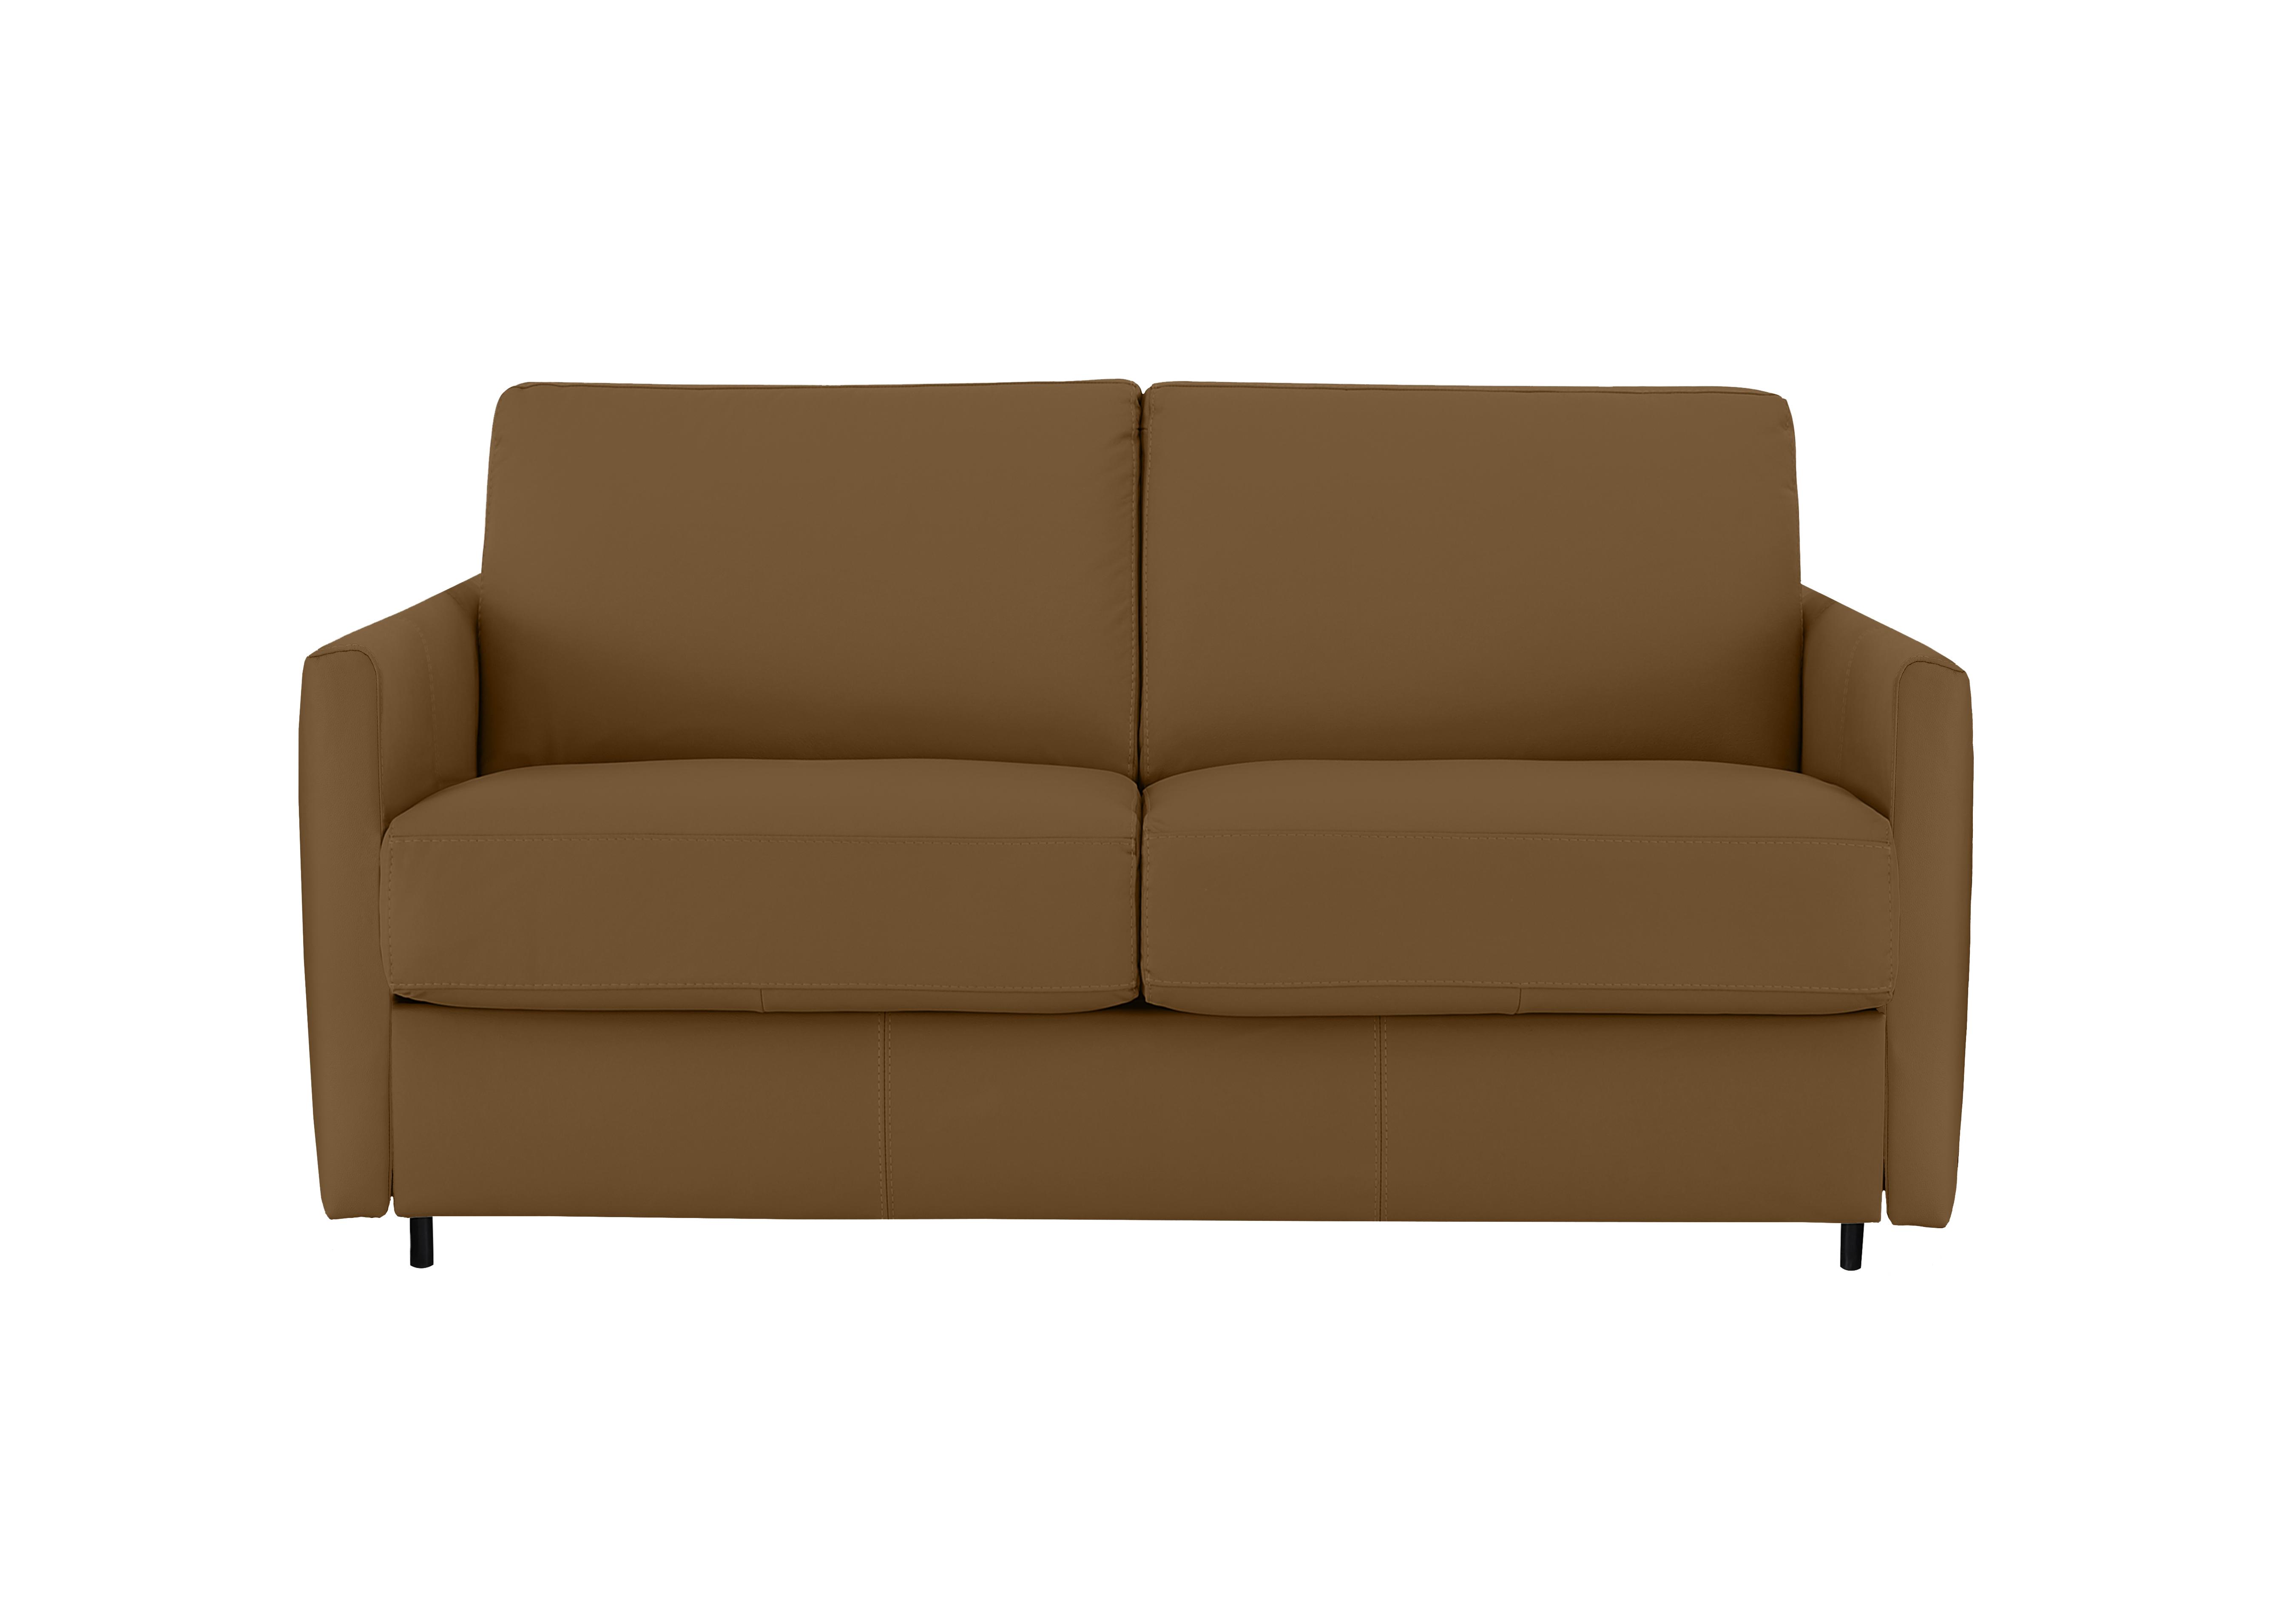 Alcova 2 Seater Leather Sofa Bed with Slim Arms in Botero Cuoio 2151 on Furniture Village